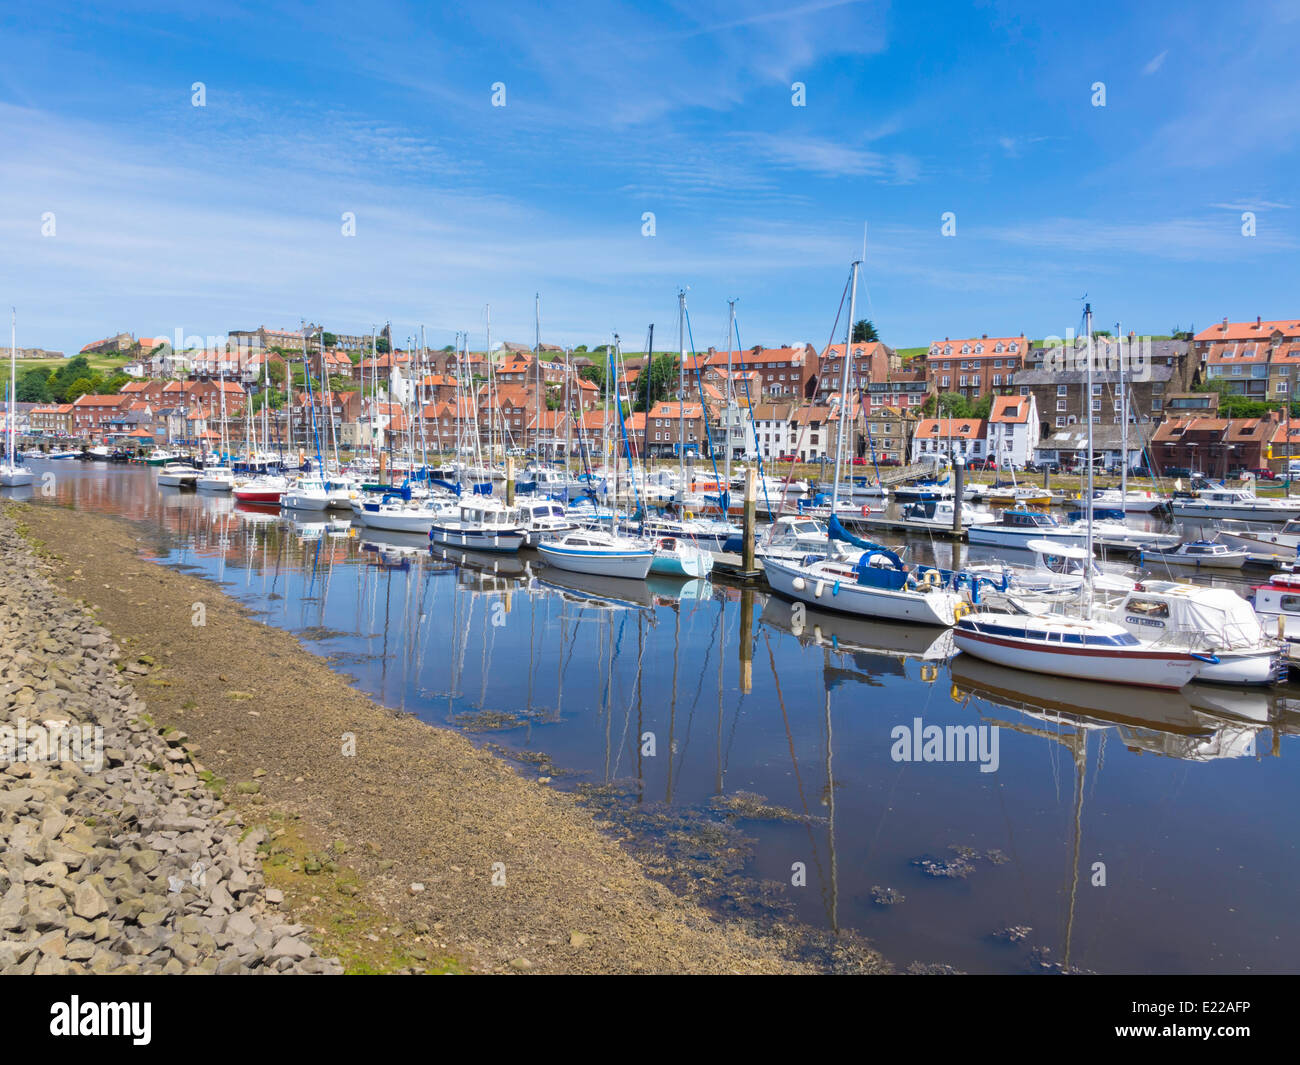 Whitby marina, in the river Esk with small pleasure craft in summer sunshine Stock Photo